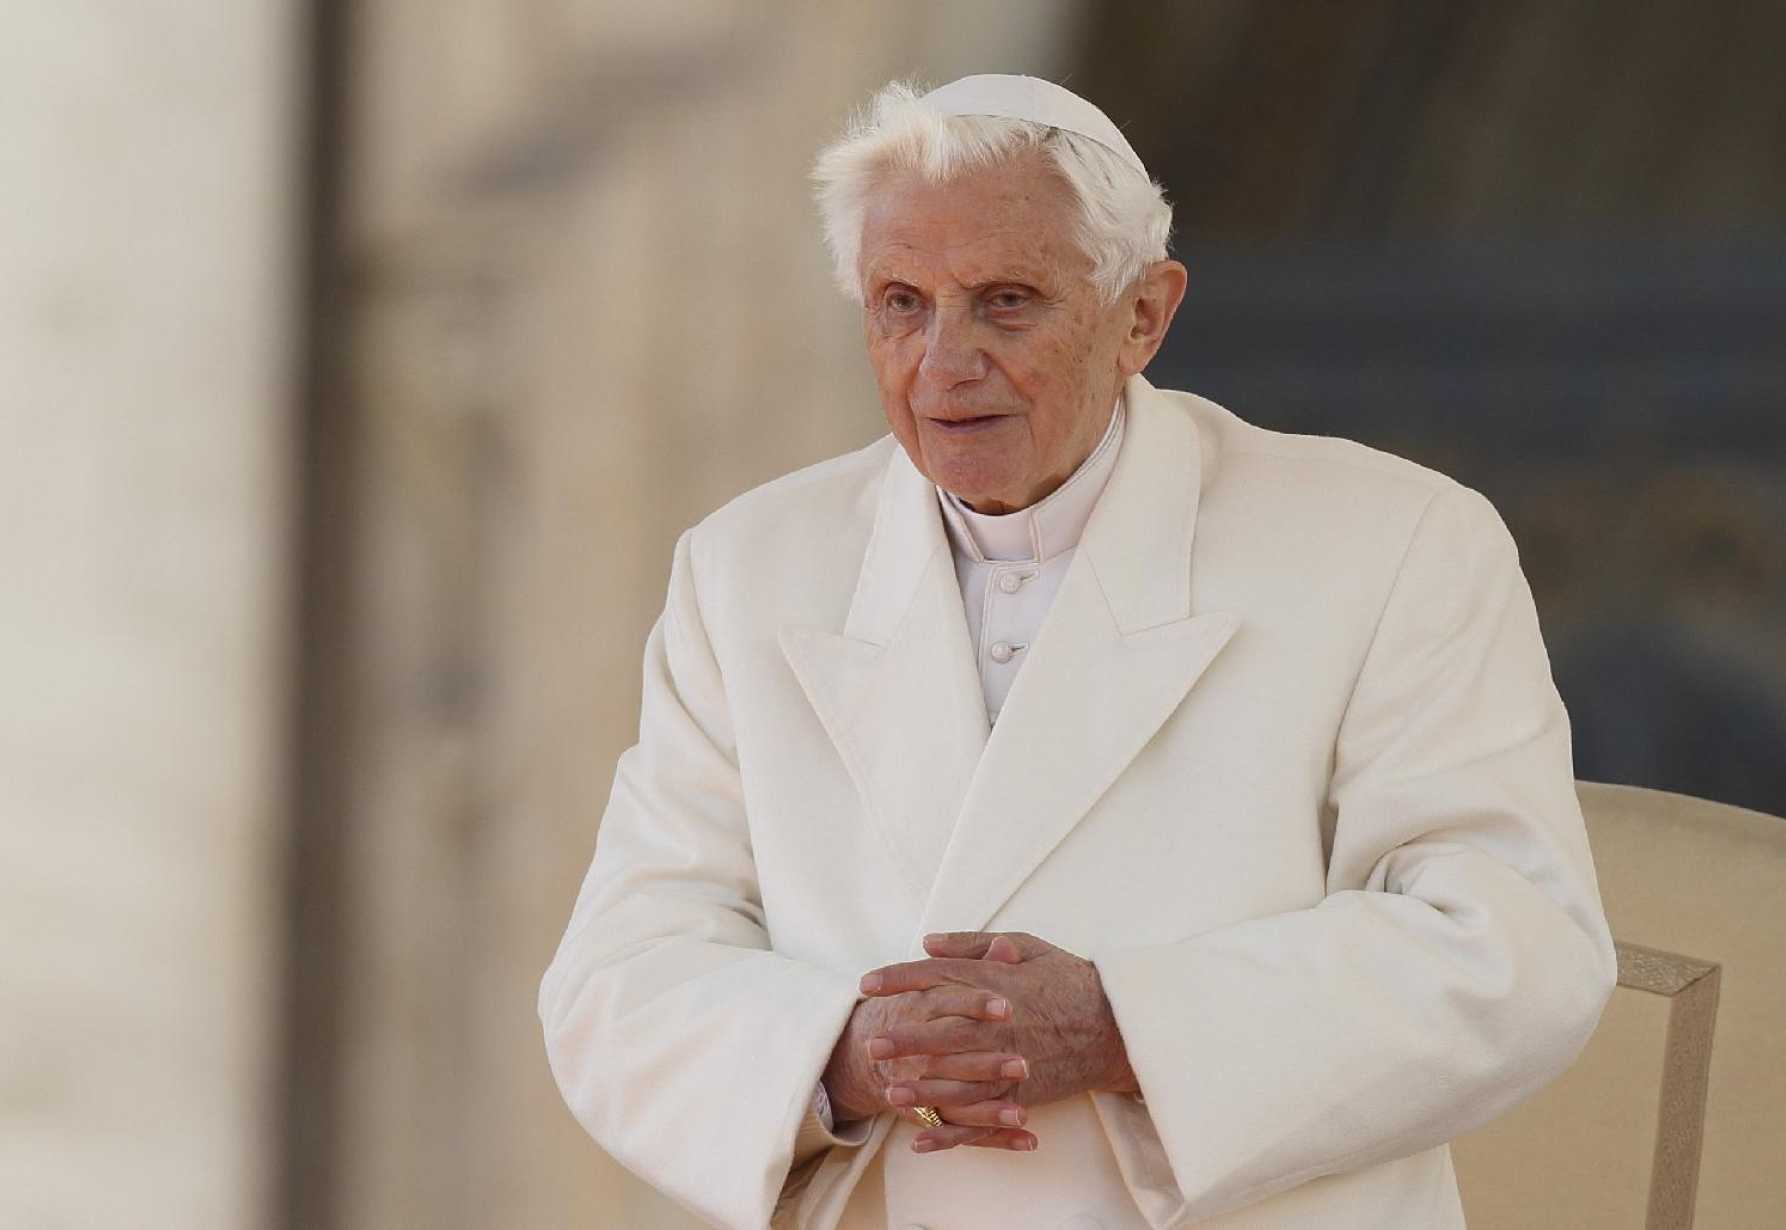 Pope Benedict's spiritual testament: 'Stand firm in the faith'